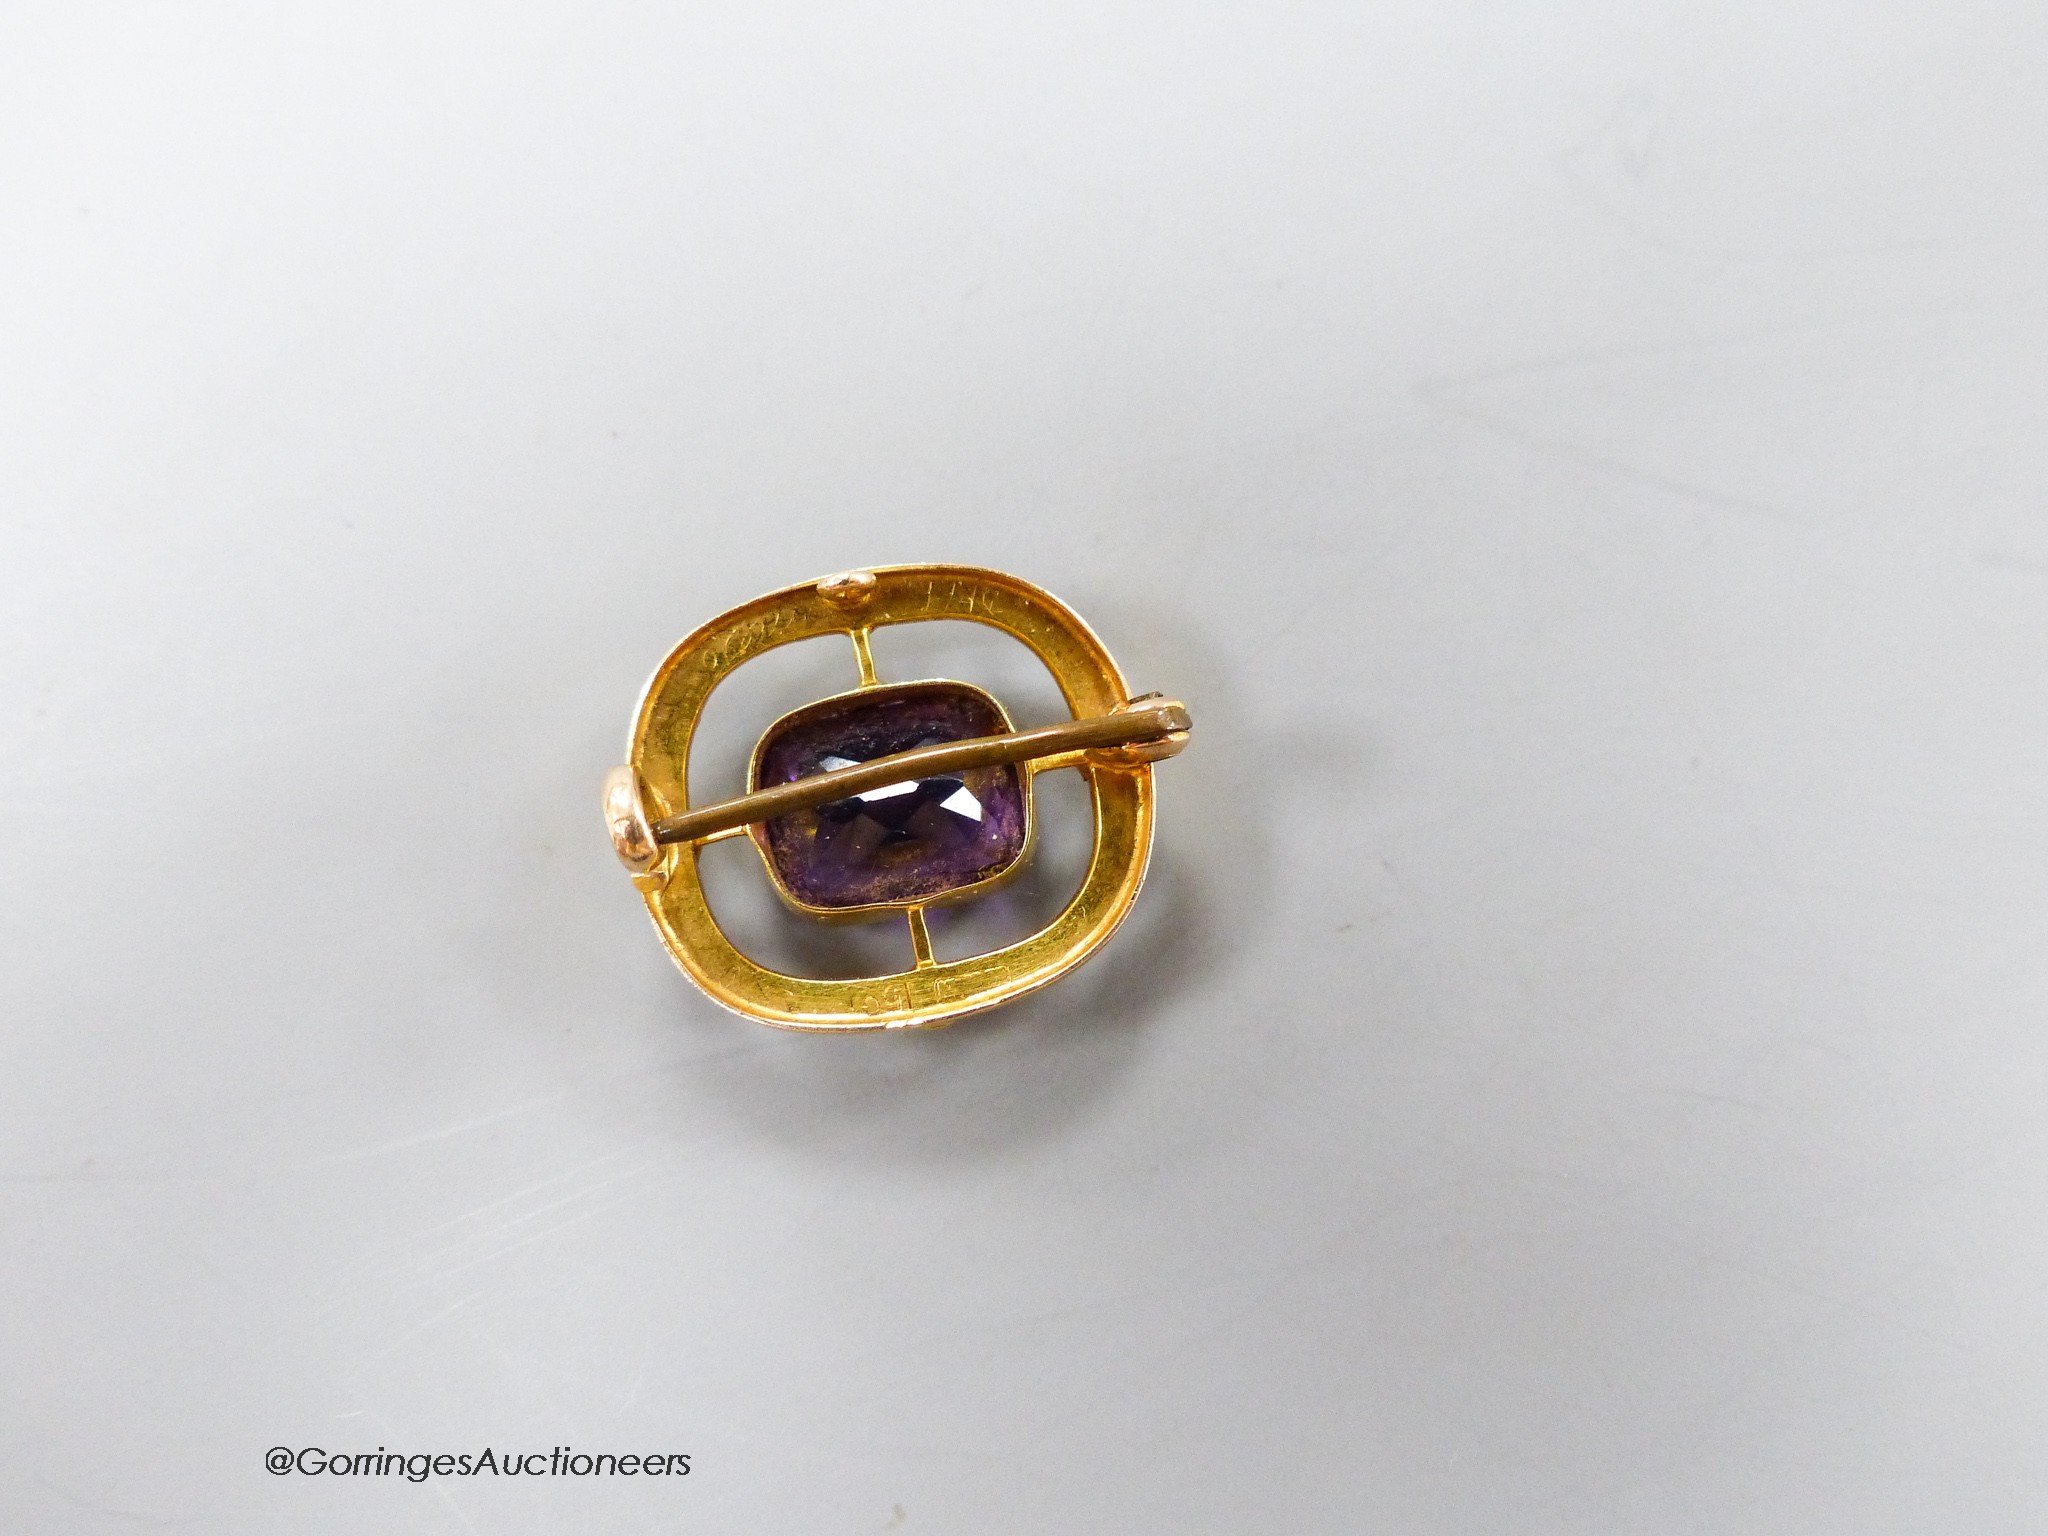 An early 20th century 15ct, amethyst, garnet and seed pearl pendant brooch, in the suffragette colours, 21mm, gross 3.6 grams.